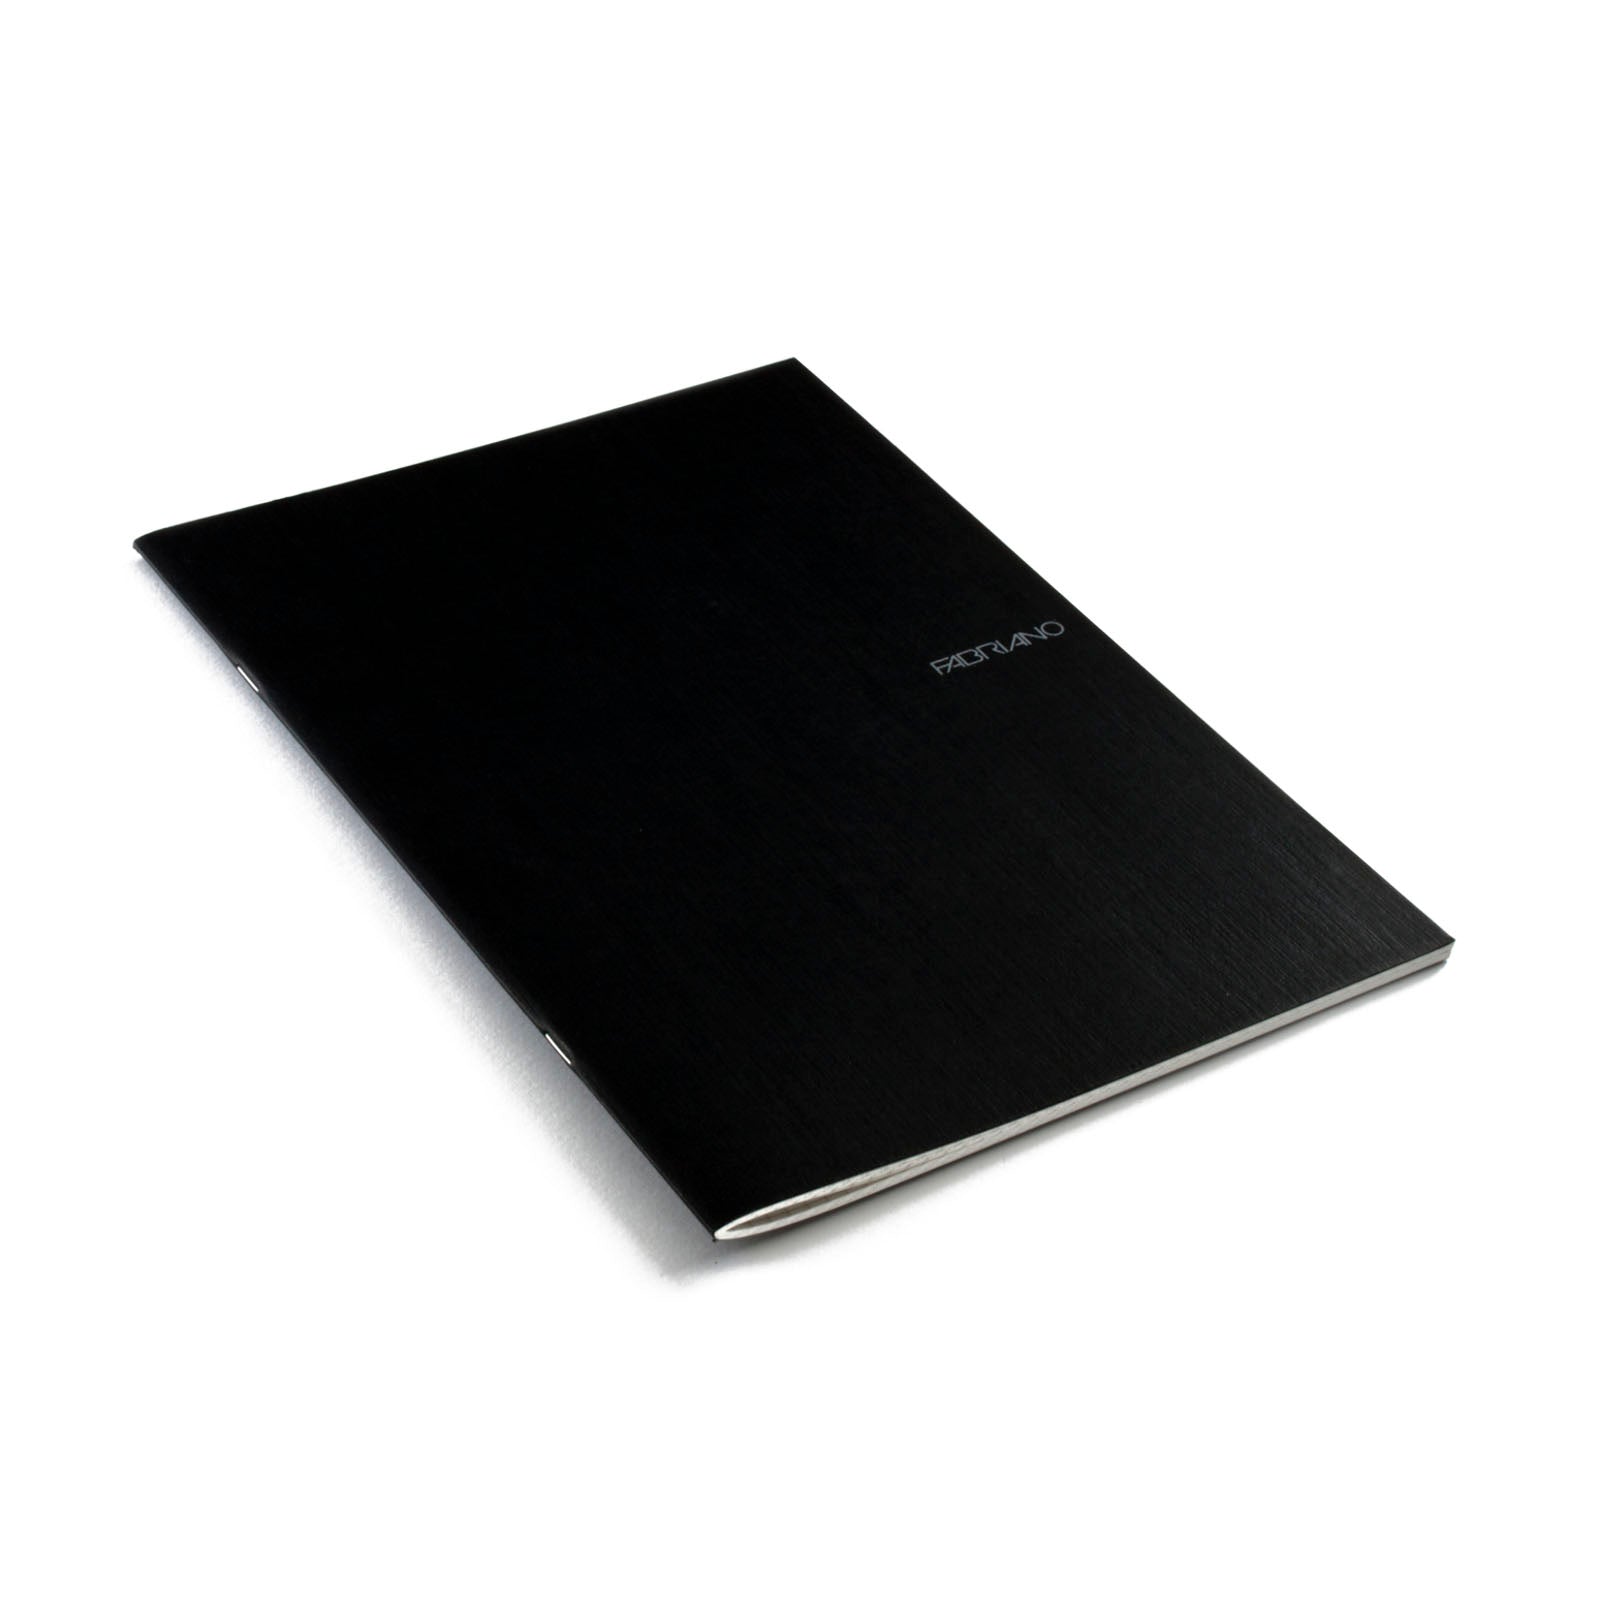 Fabriano EcoQua Notebook Large Staple-Bound Lined 38 Sheets Black